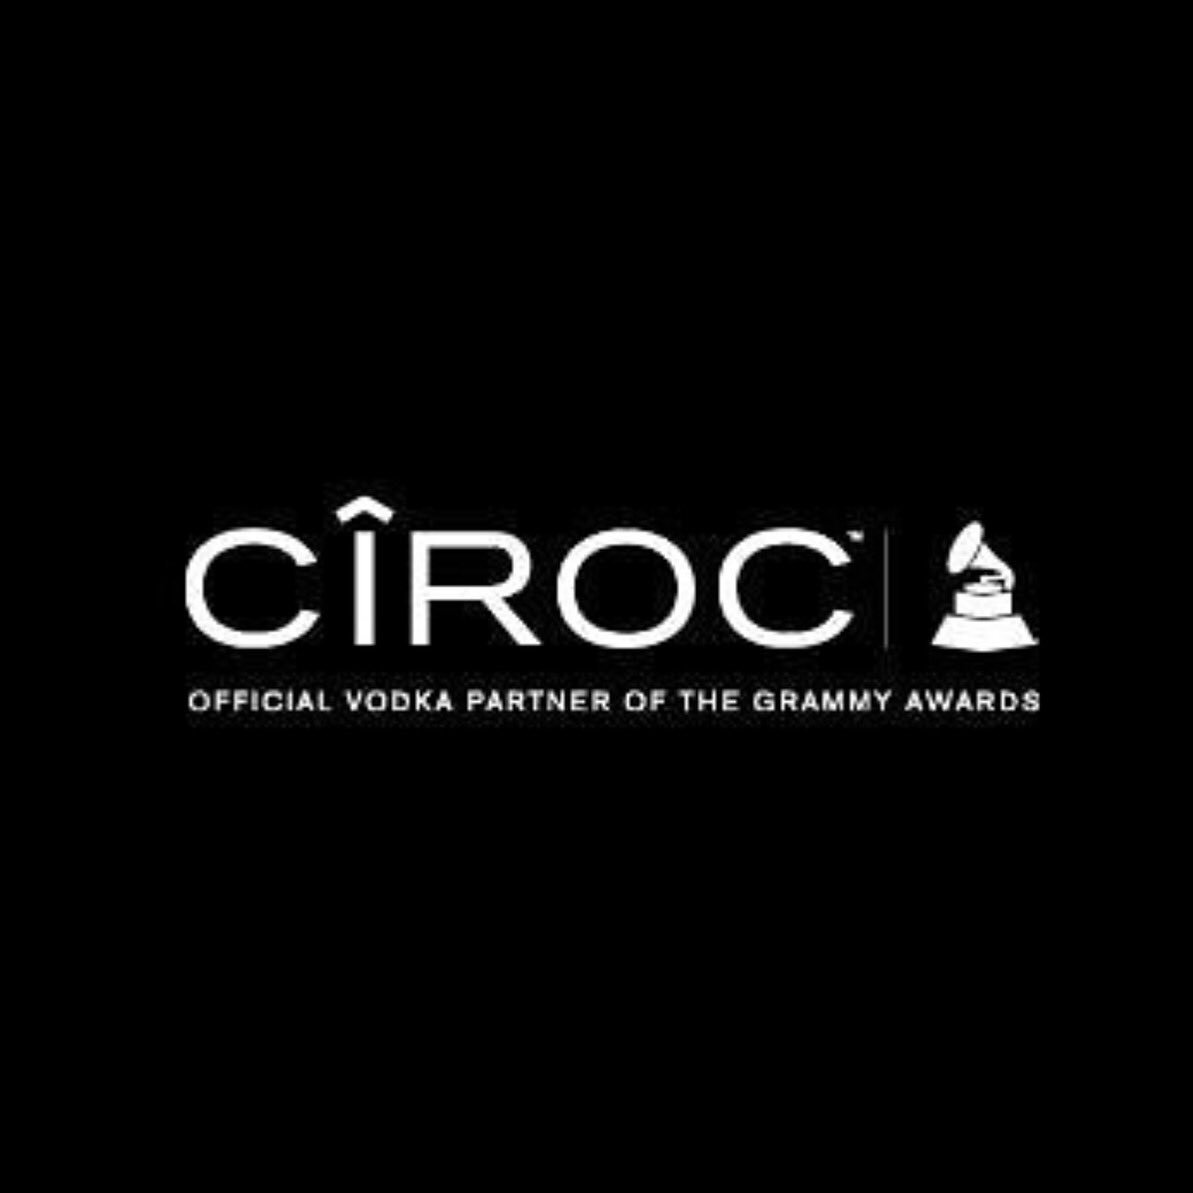 Get @ciroc delivered to your home tonight for #TheGRAMMYs via @AreYouThirstie https://t.co/ainfSOQhU1 https://t.co/WPoNZdZ00S